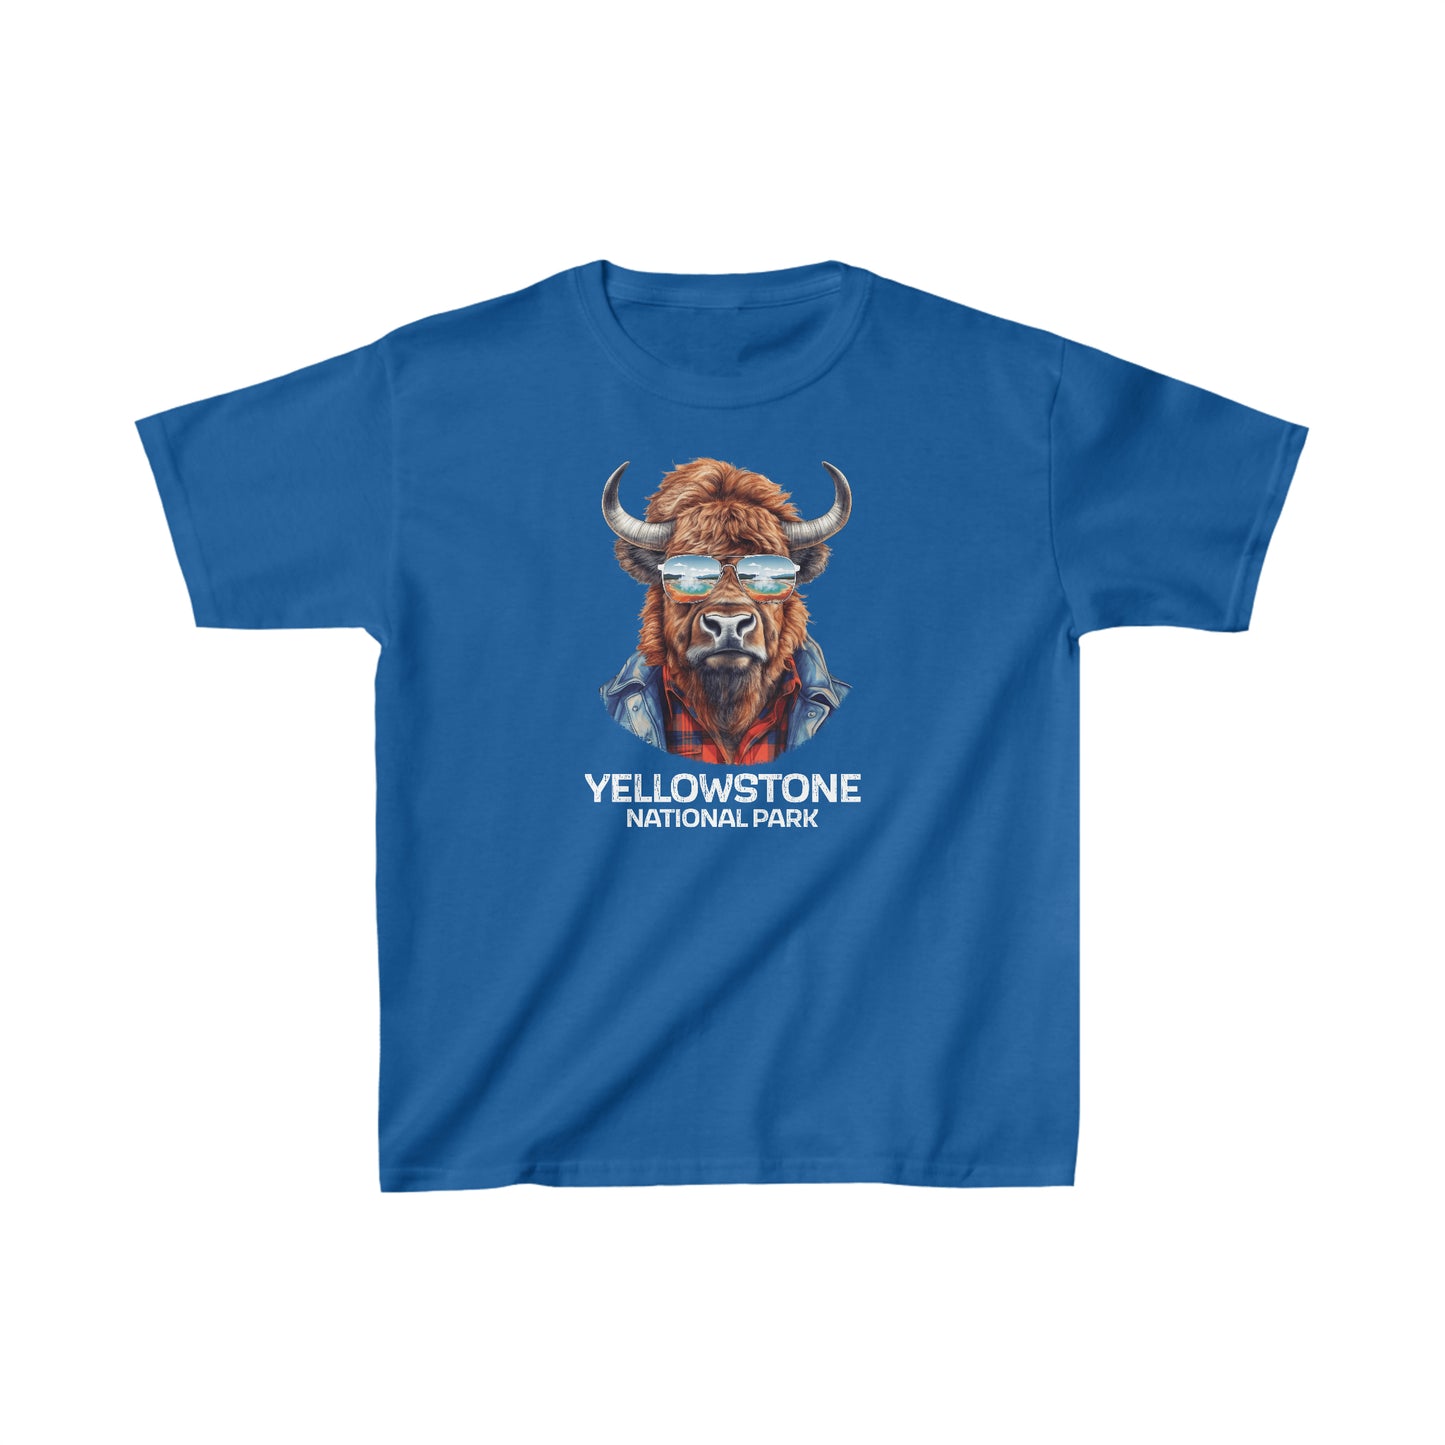 Yellowstone National Park Child T-Shirt - Cool Bison